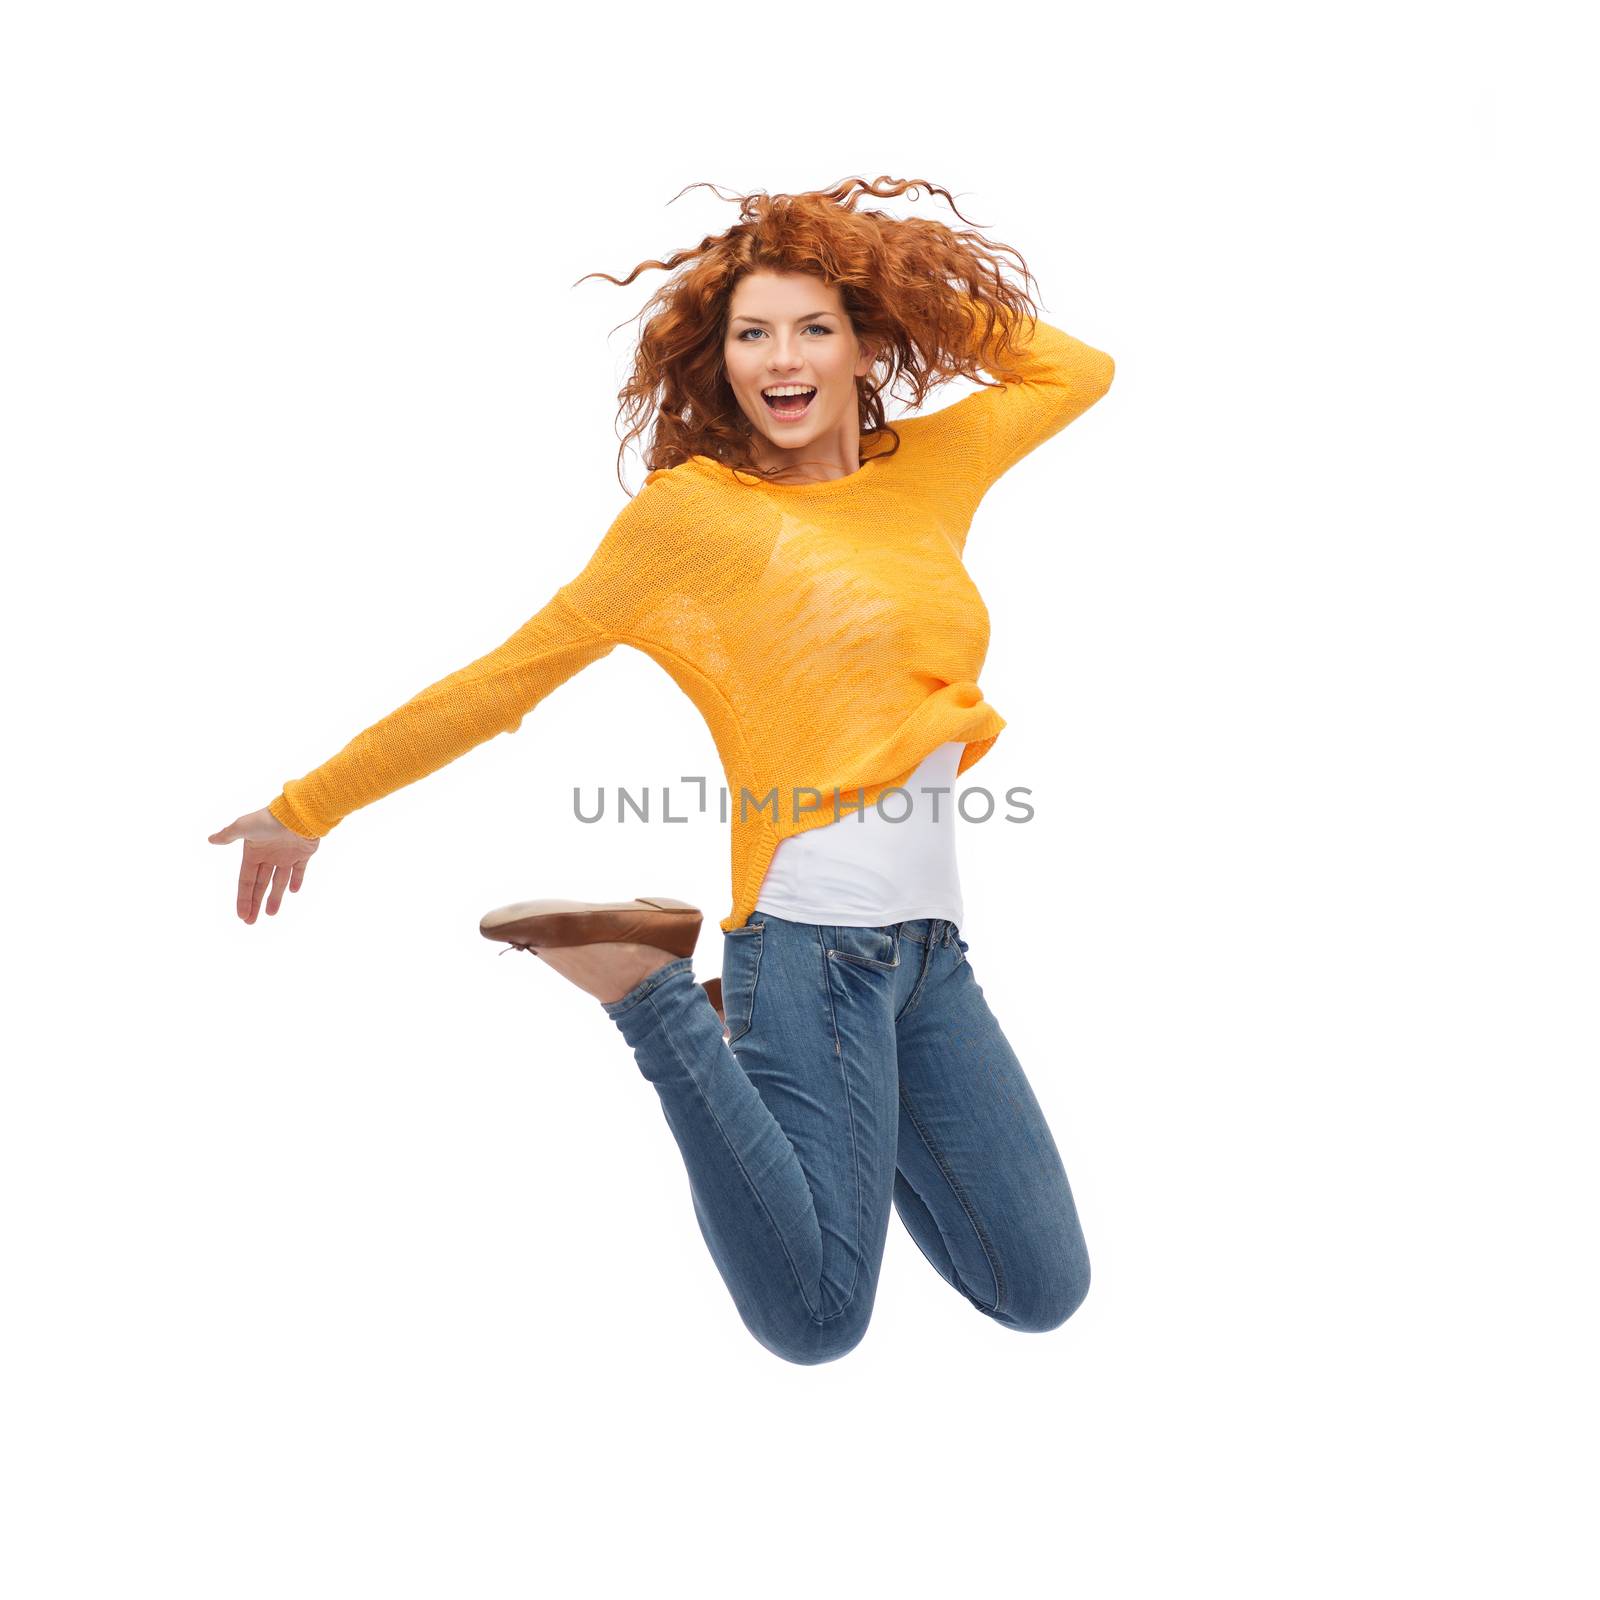 smiling young woman jumping in air by dolgachov